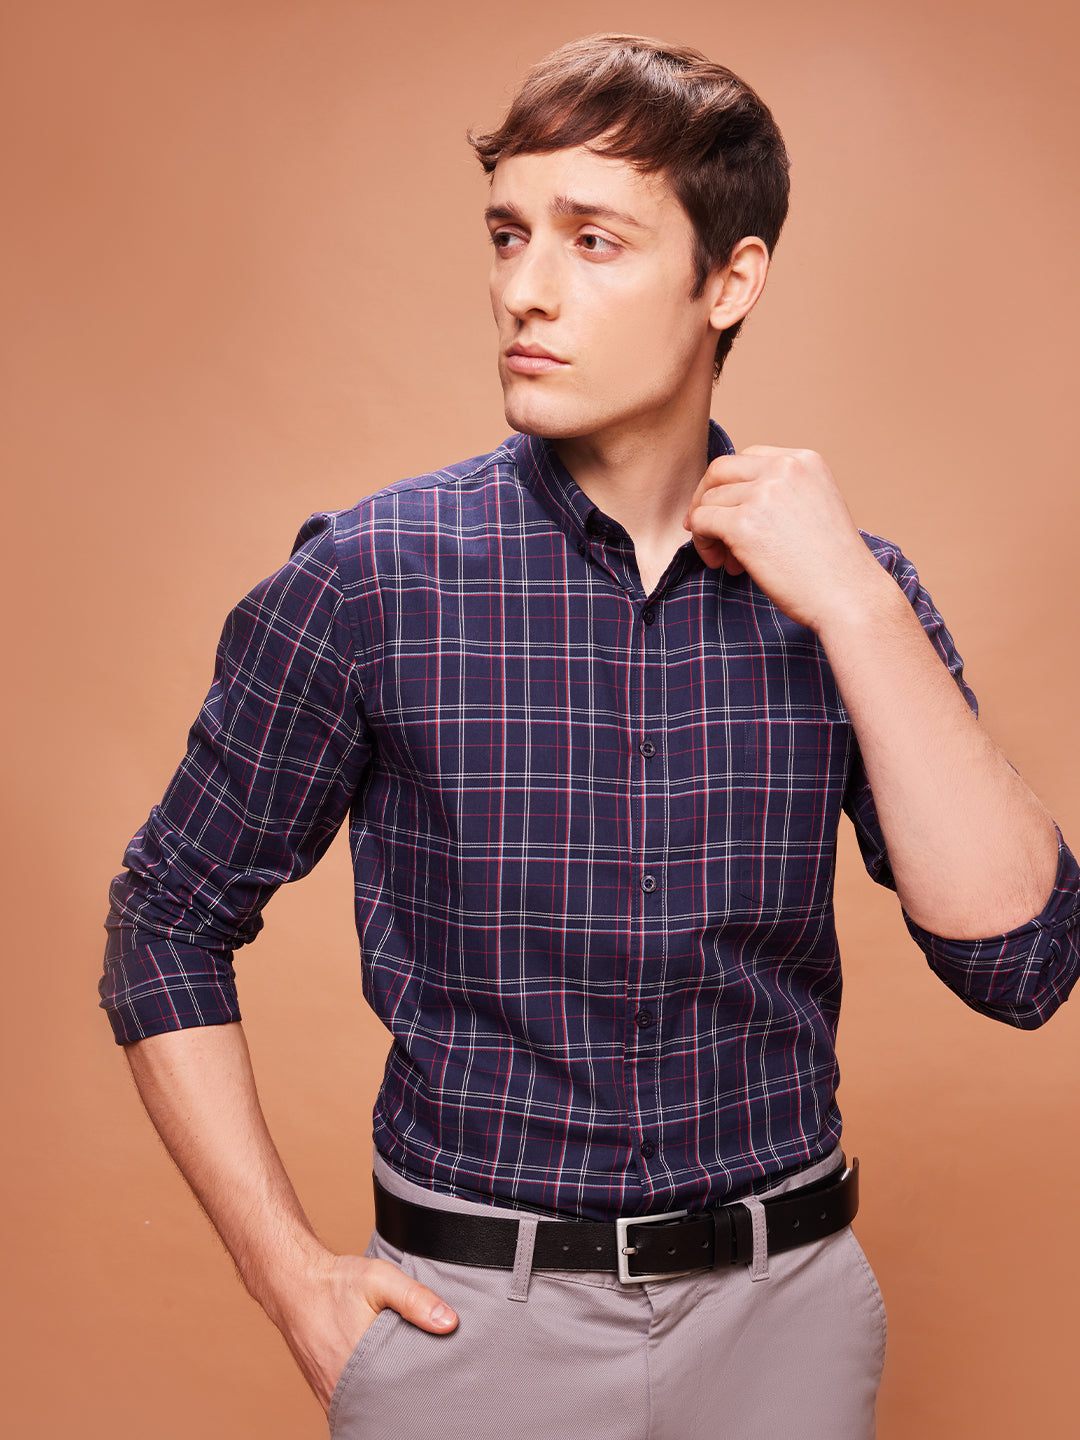 Bombay High Men's Chequered Electric Blue Shirt